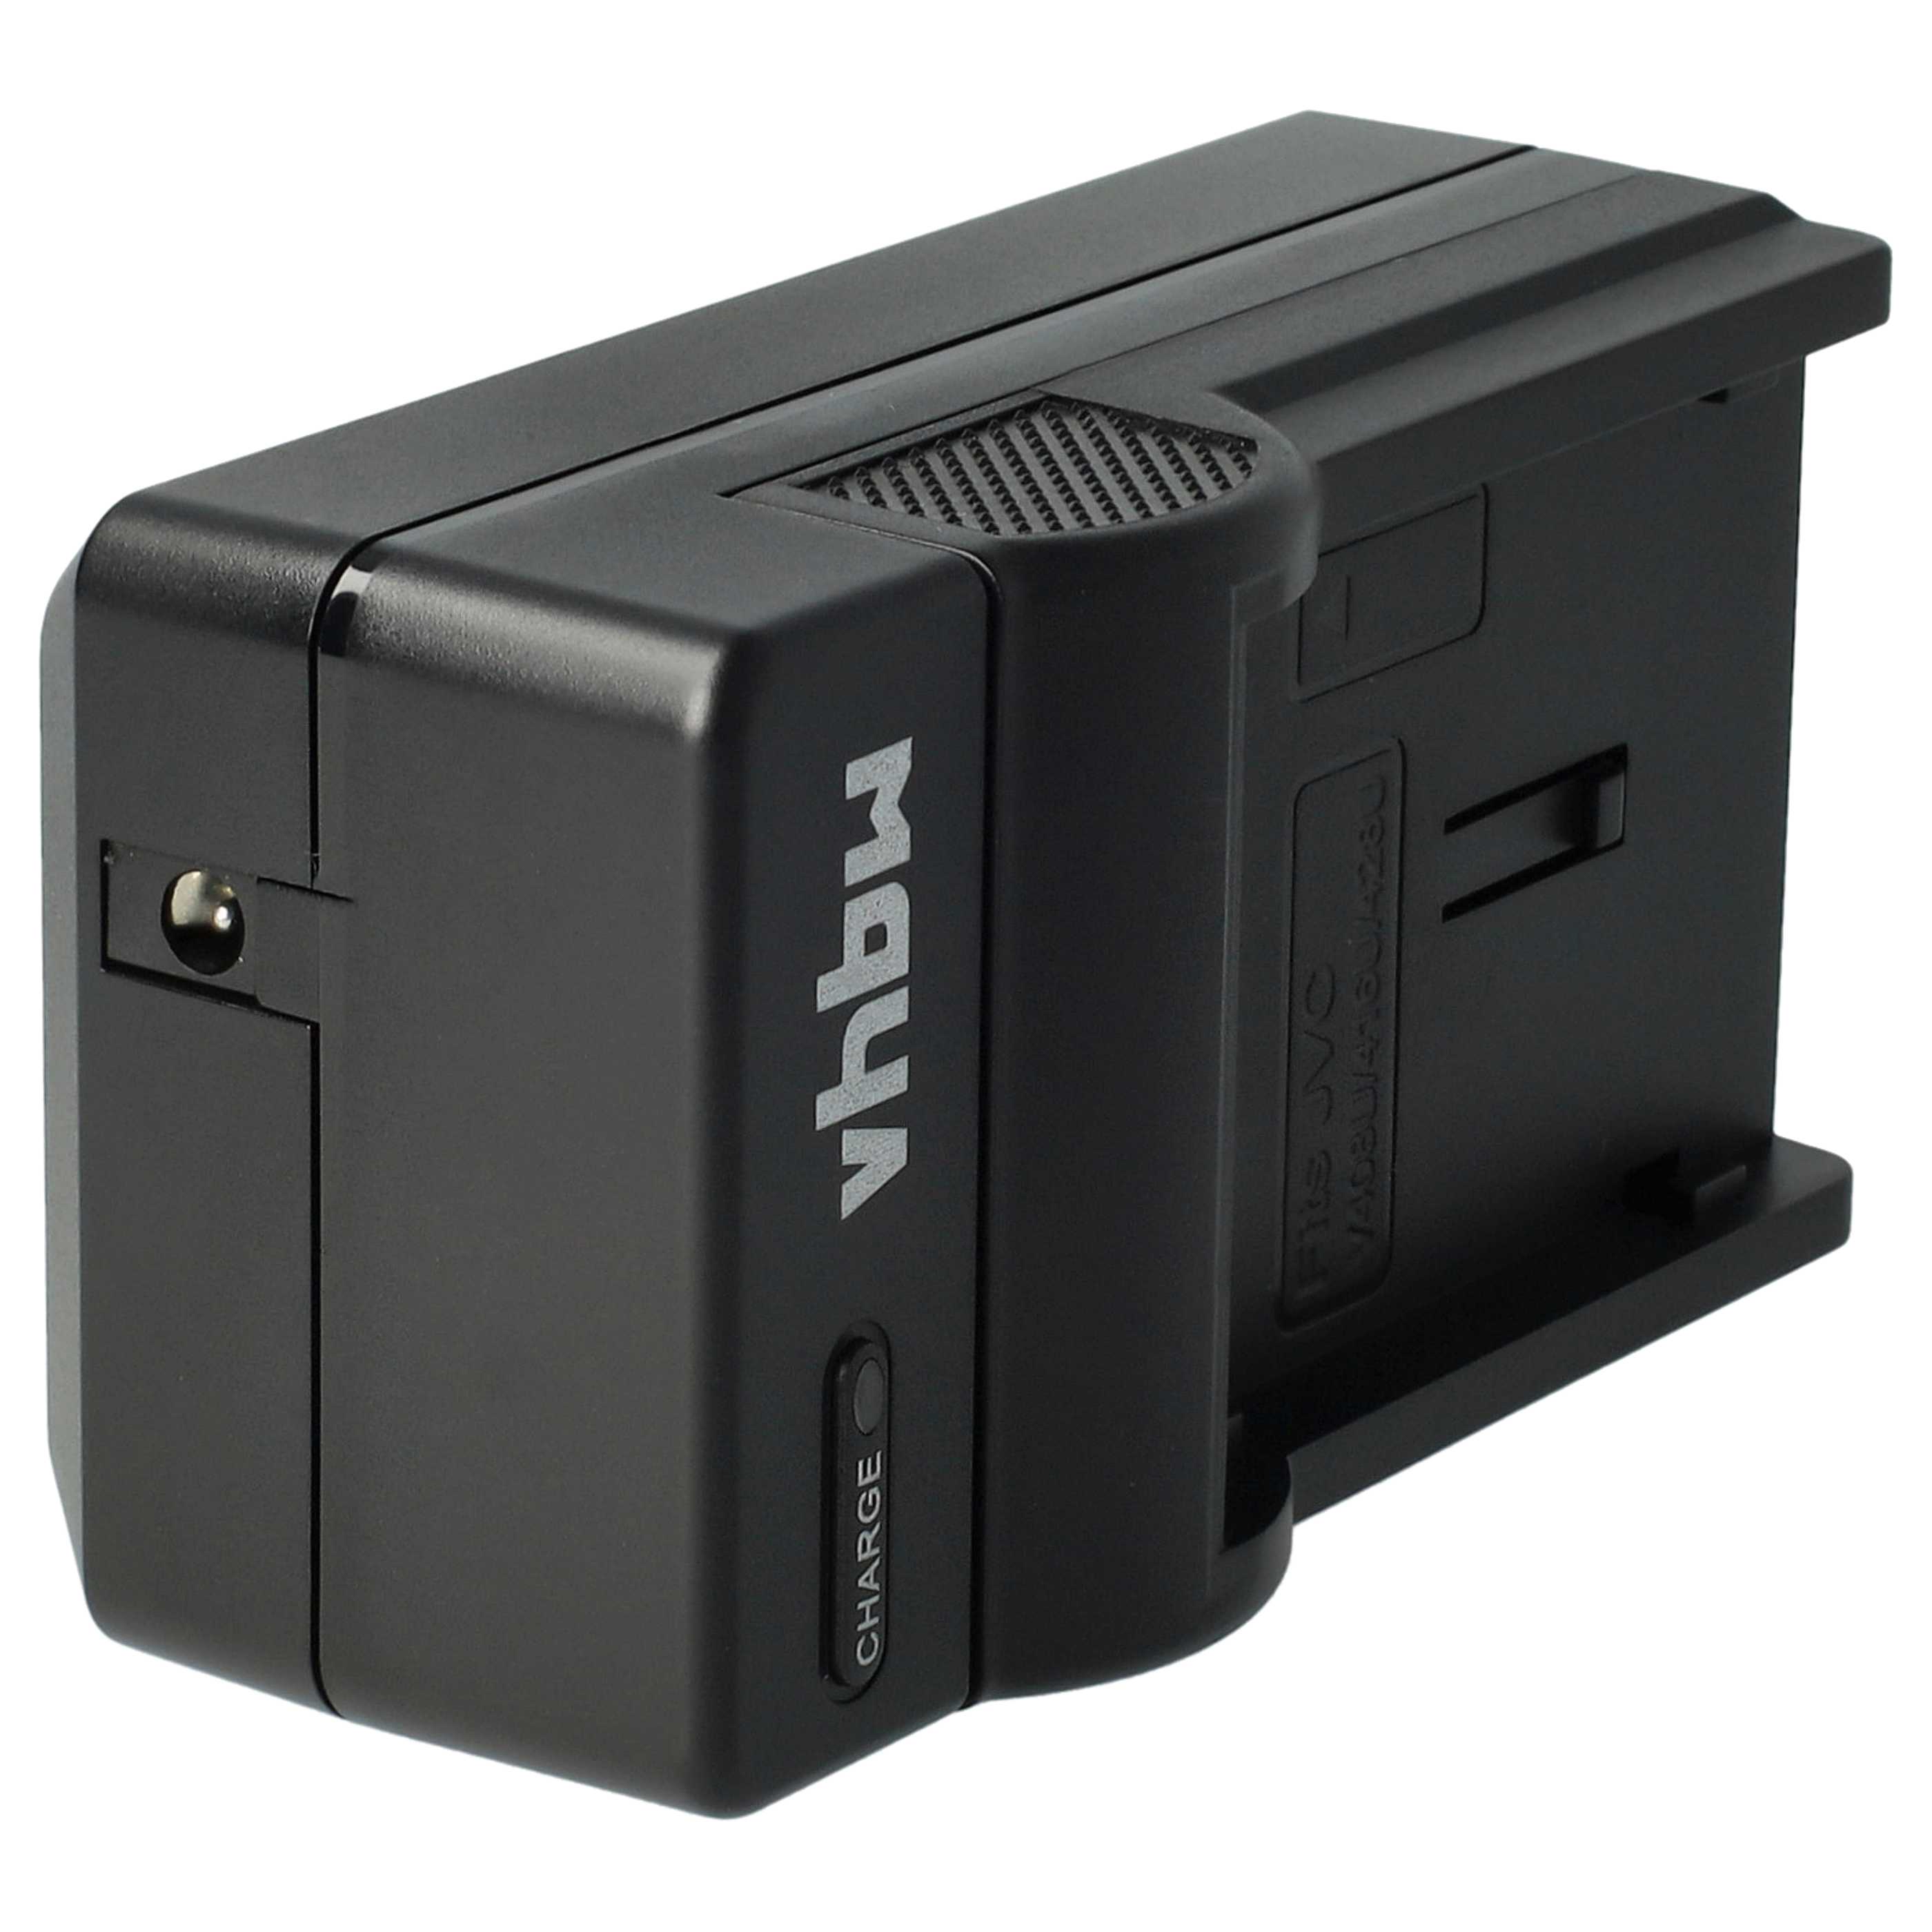 Battery Charger suitable for CU-VH1 Camera etc. - 0.6 A, 8.4 V